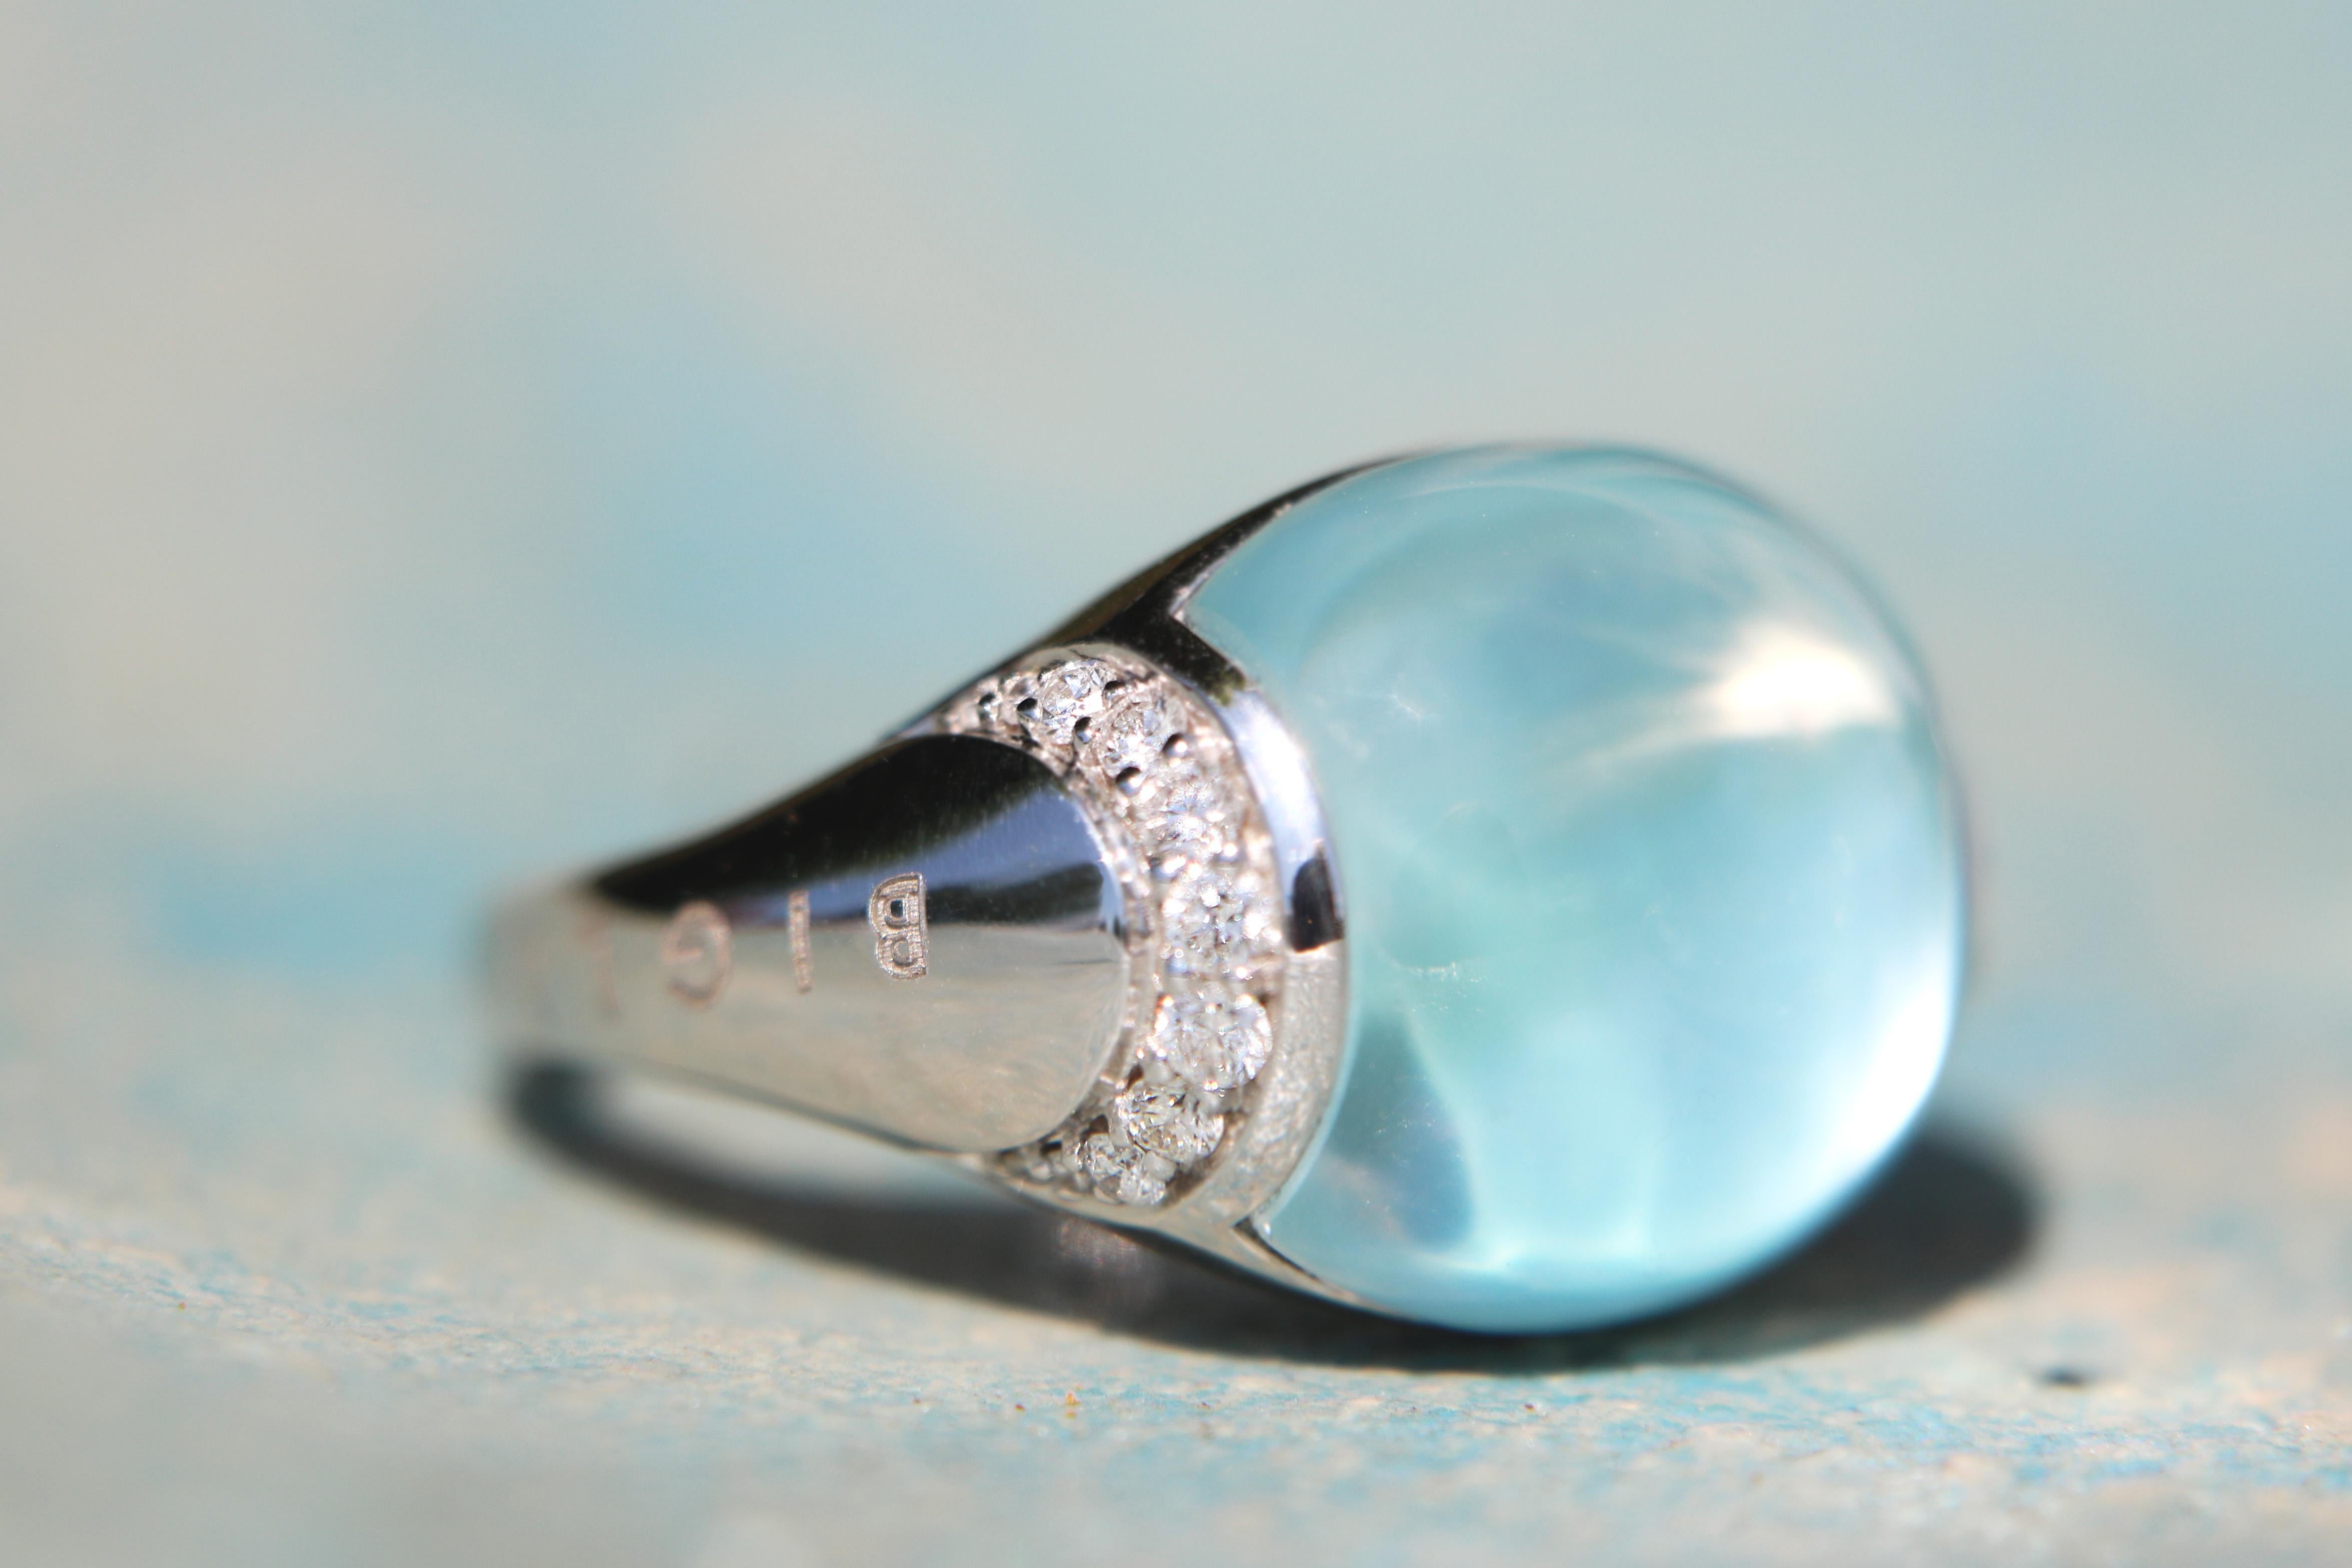 Moon ring in 18kt white gold with Turquoise, Rock Crystal and diamonds (0.3ct).

Reference: 20R99Wcrmptudia
Stone combination: Turquoise, Rock Crystal 
Color gold: white
Diamond: 0,3 ct
Size: 55 - Can not be altered

Please note that this ring has a